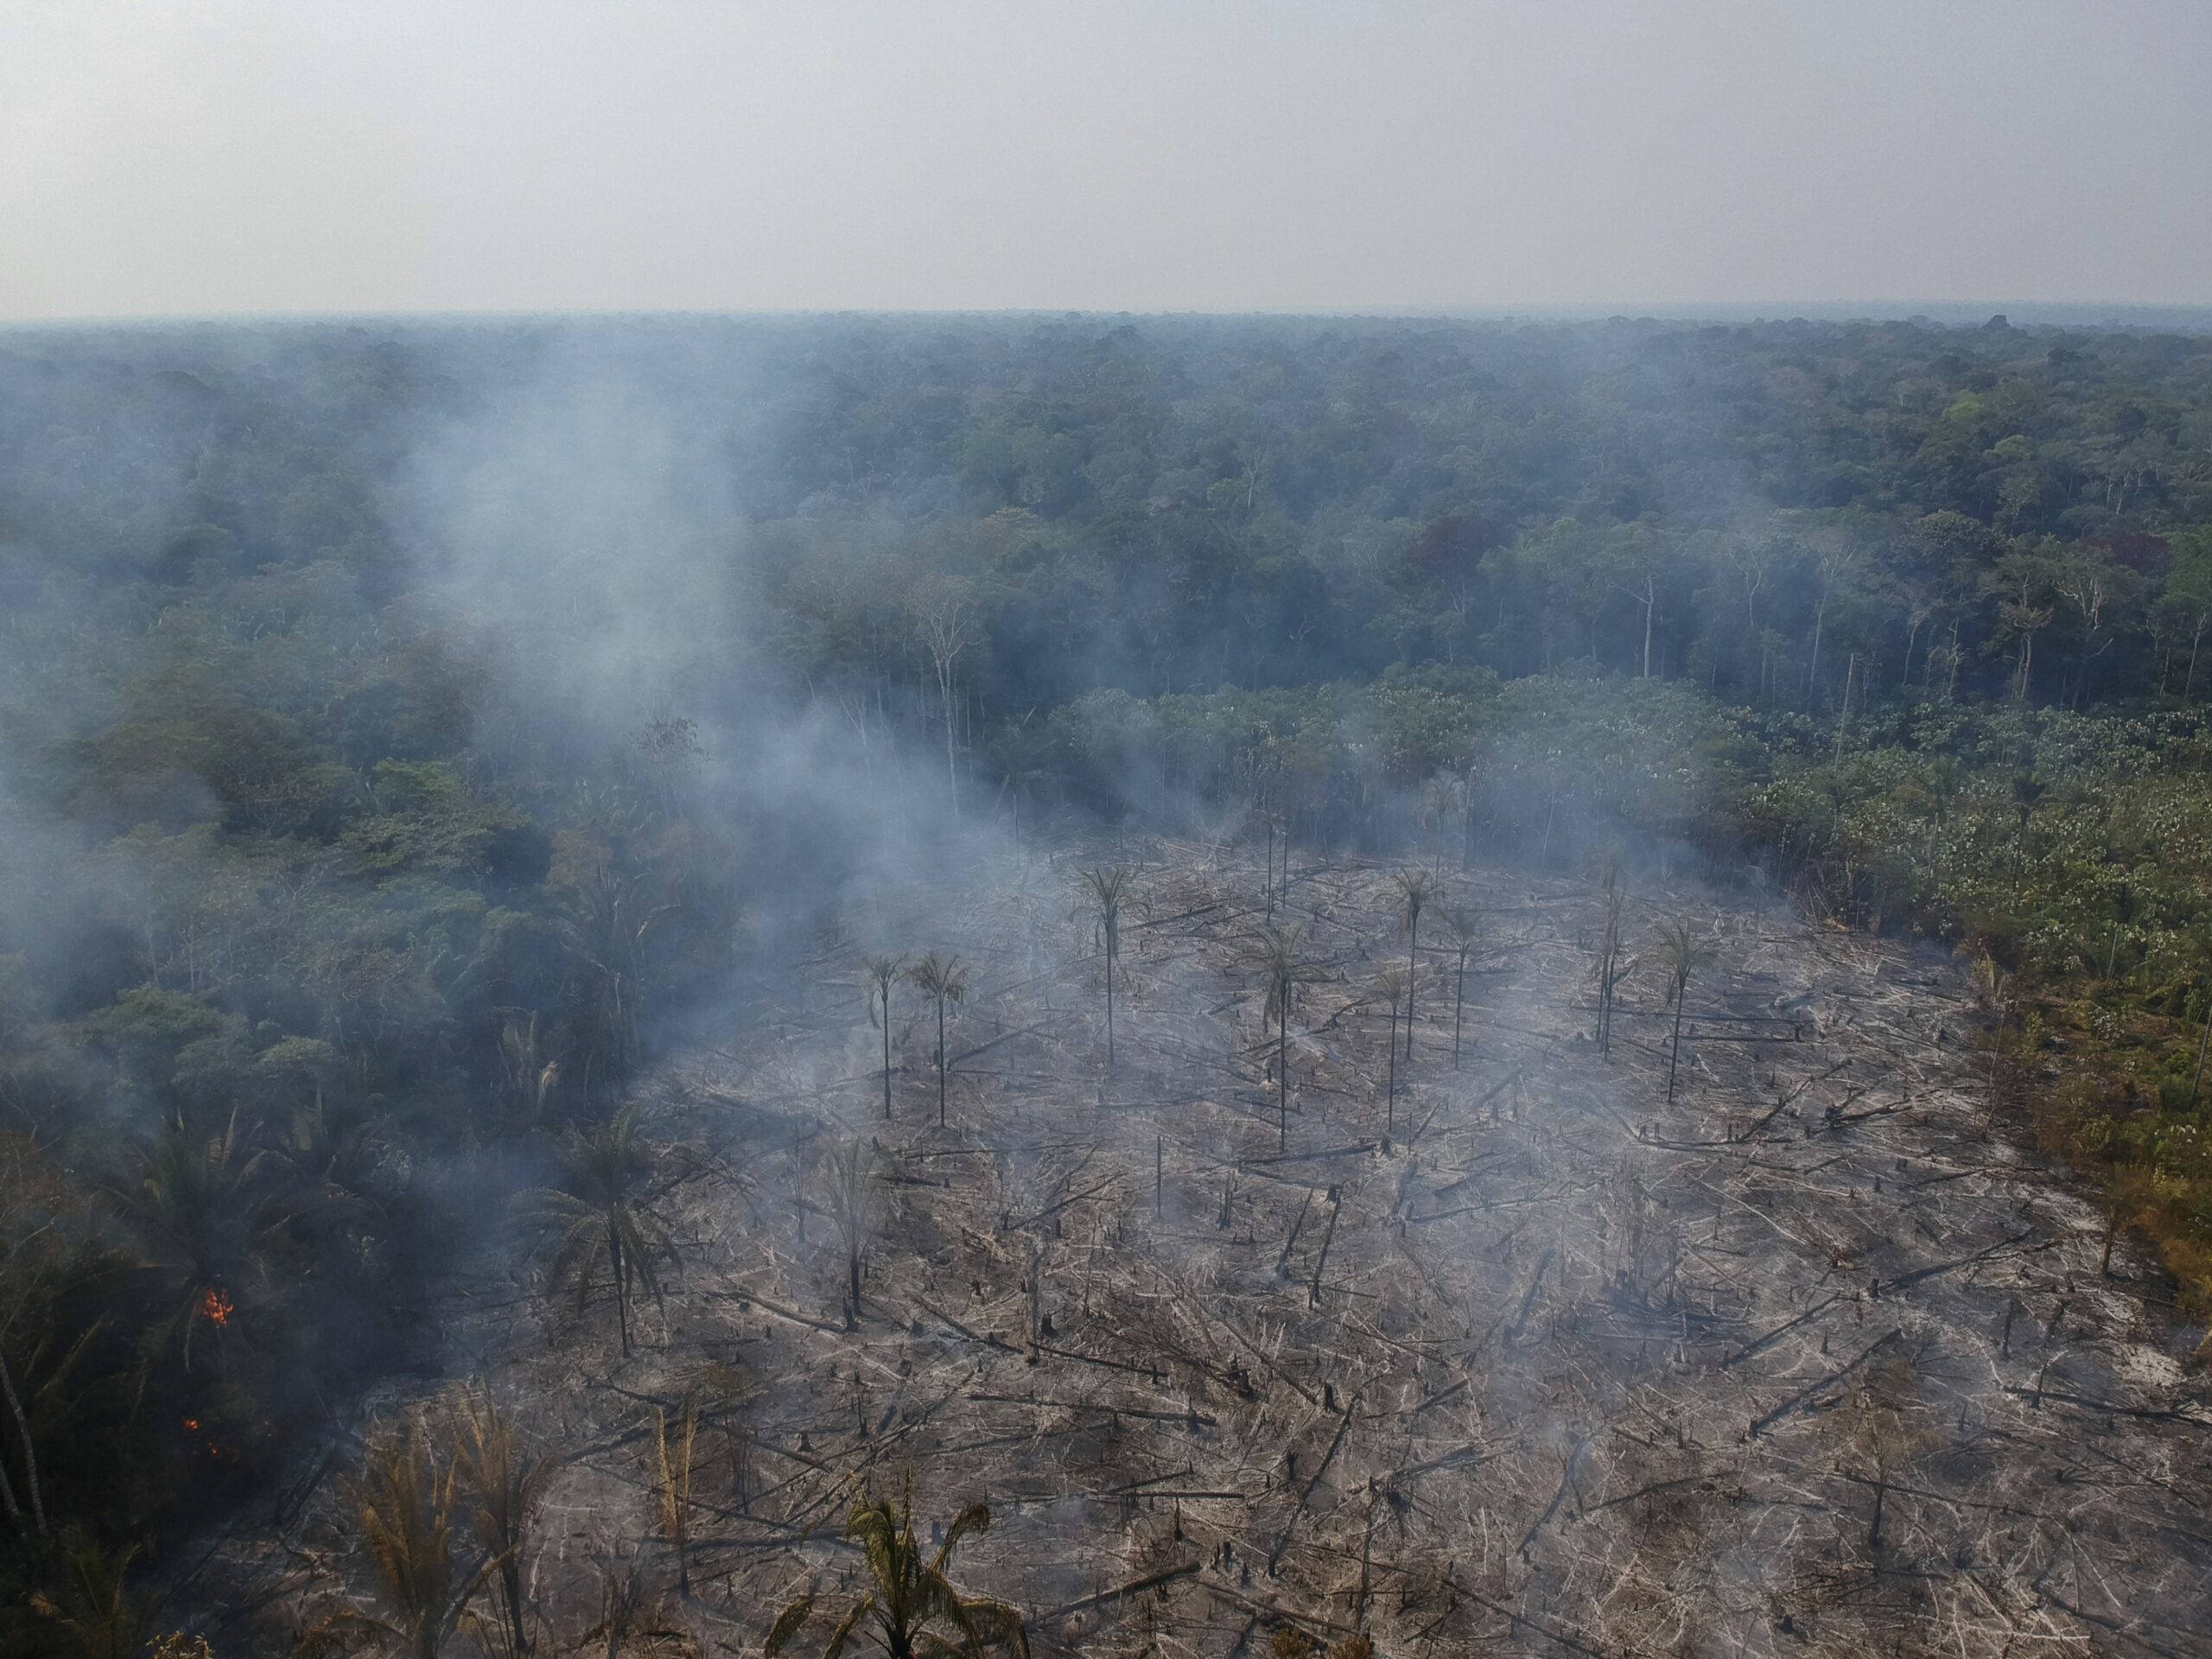 Fires destroying forest in the Amazon